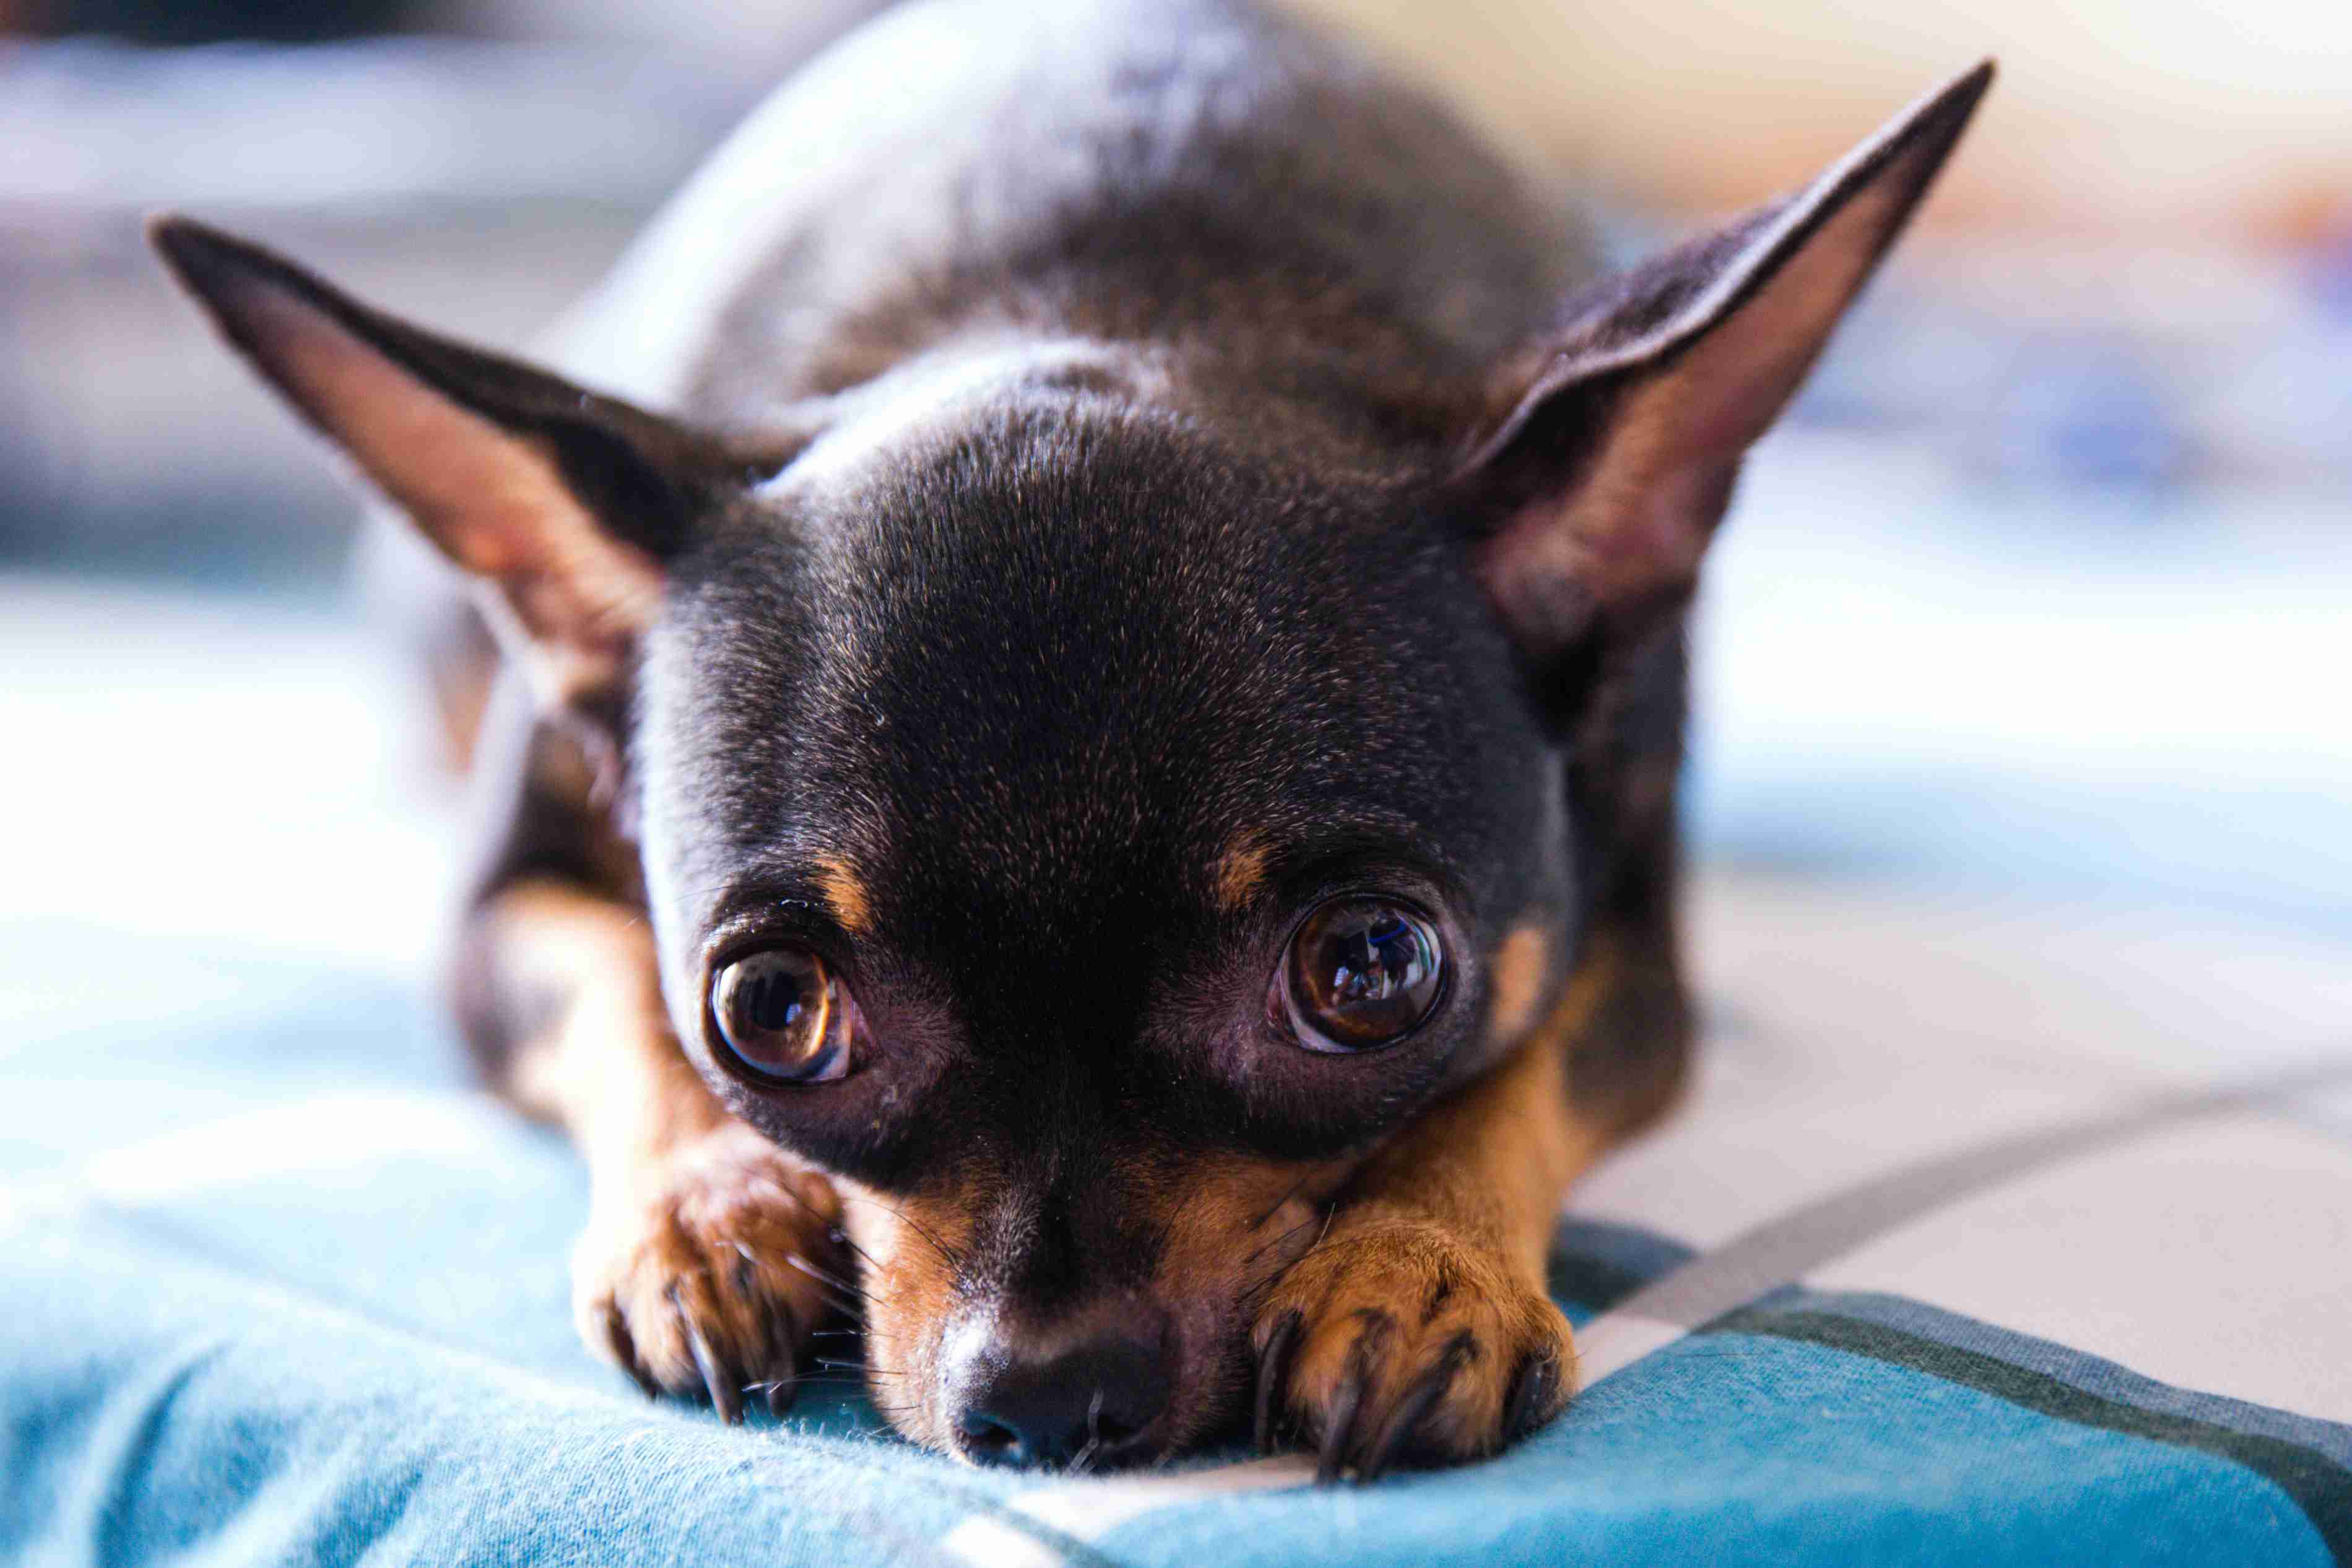 How can I protect myself and others from my aggressive Chihuahua?